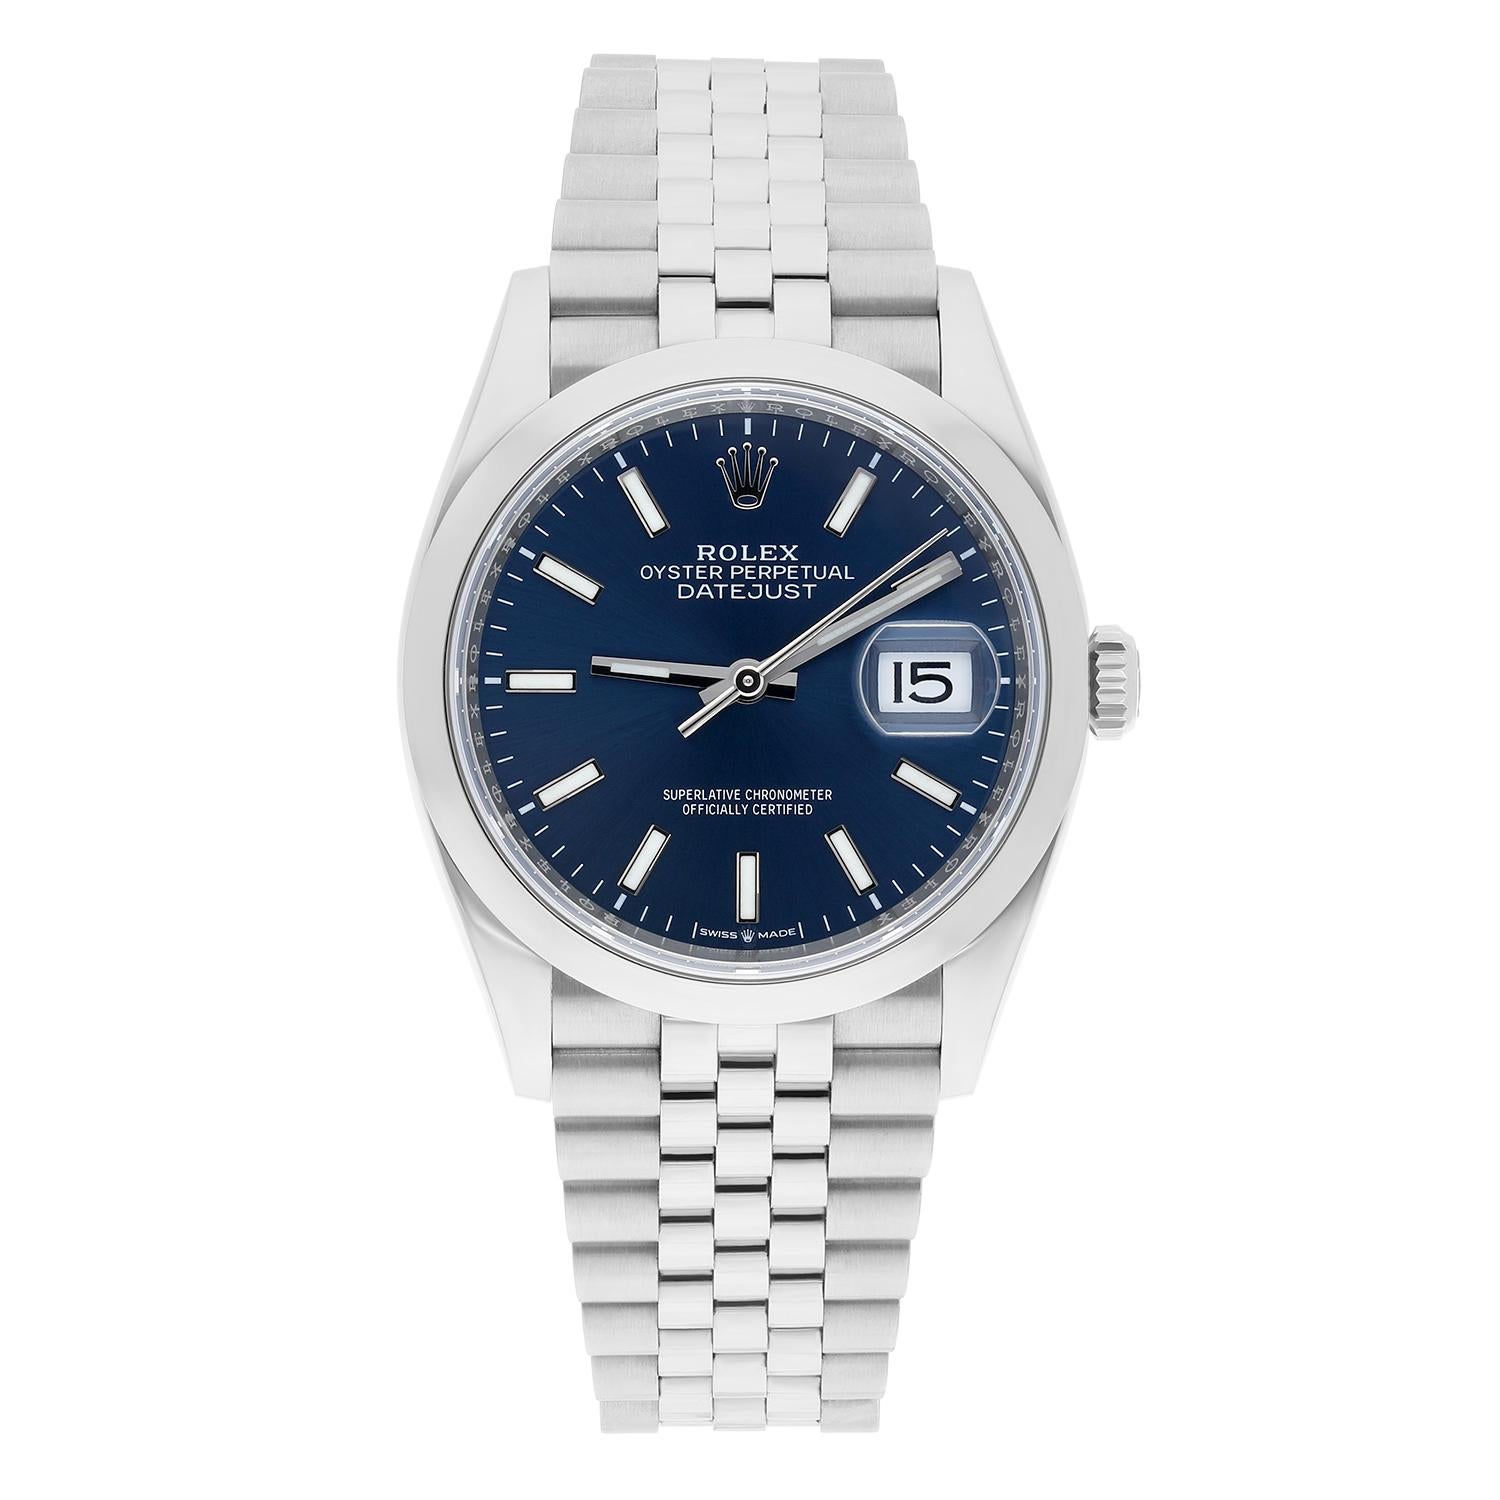 This Rolex Datejust 36mm Jubilee Steel Blue Dial Automatic Mens Watch 126200 is a luxurious timepiece with a Swiss-made mechanical automatic movement. It features a fixed smooth bezel, sunburst dial pattern with stick indexes and luminous hands, and